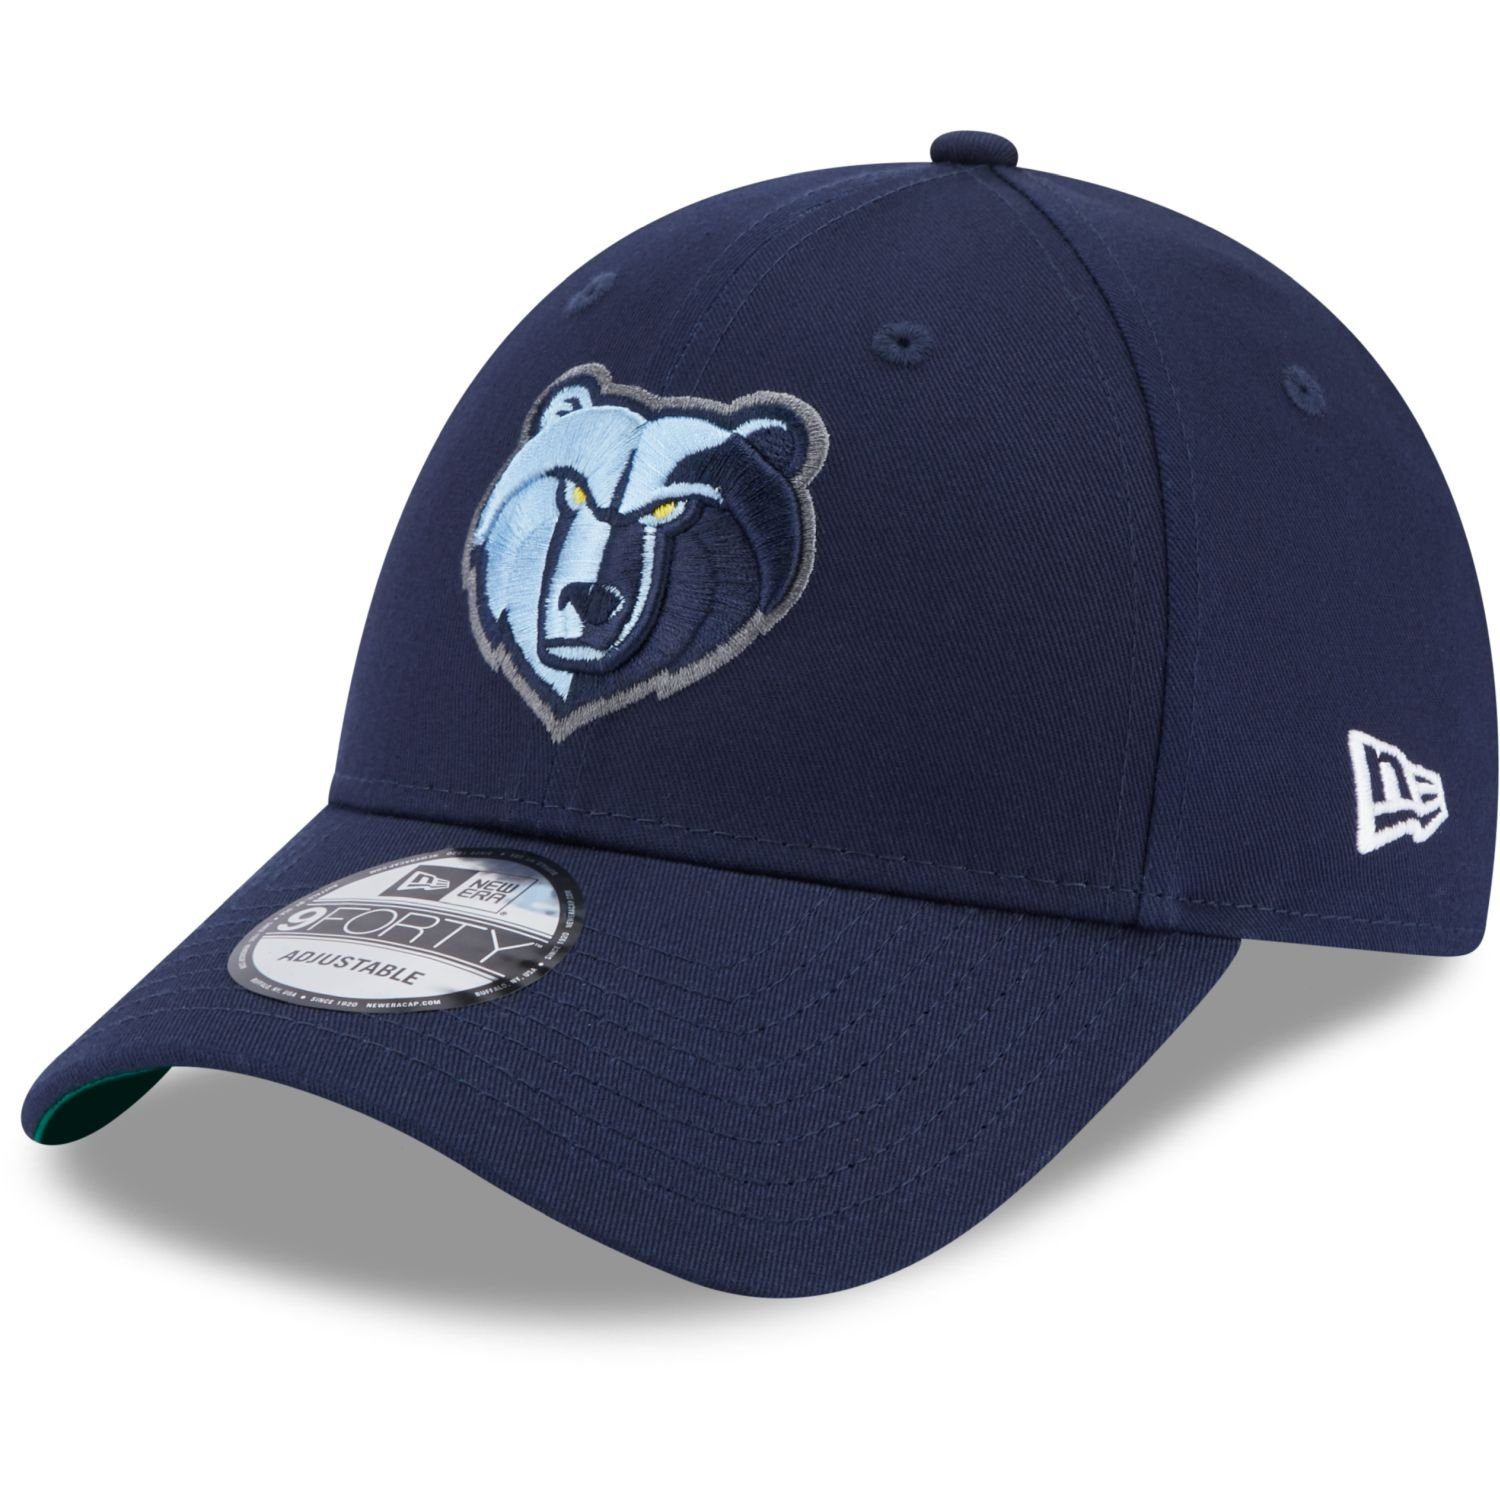 New Strapback 9Forty SIDE Grizzlies Cap Era PATCH Memphis Baseball